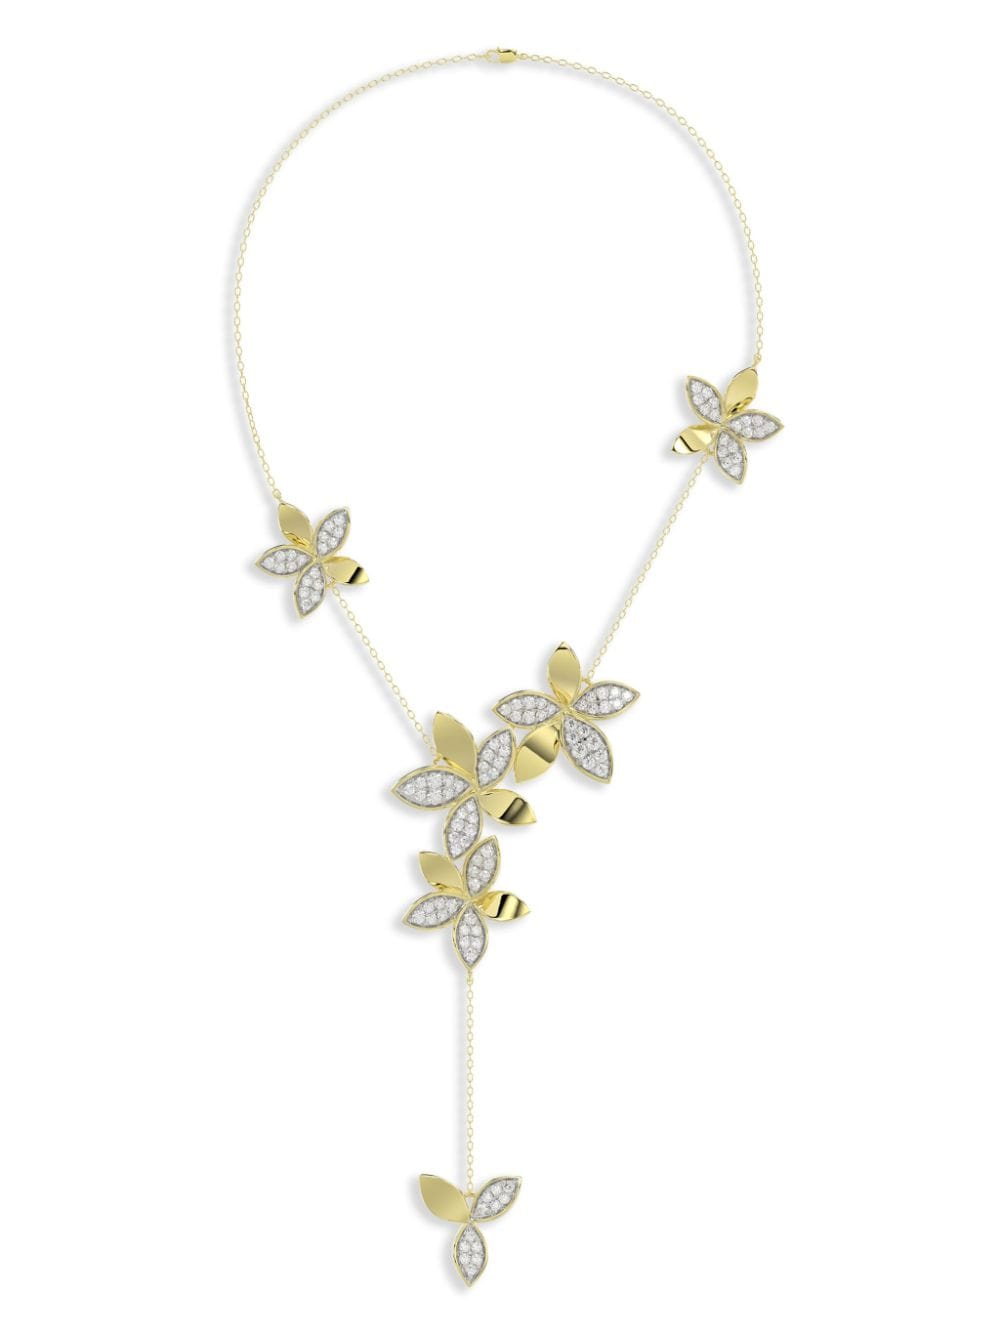 18kt yellow gold floral diamond necklace